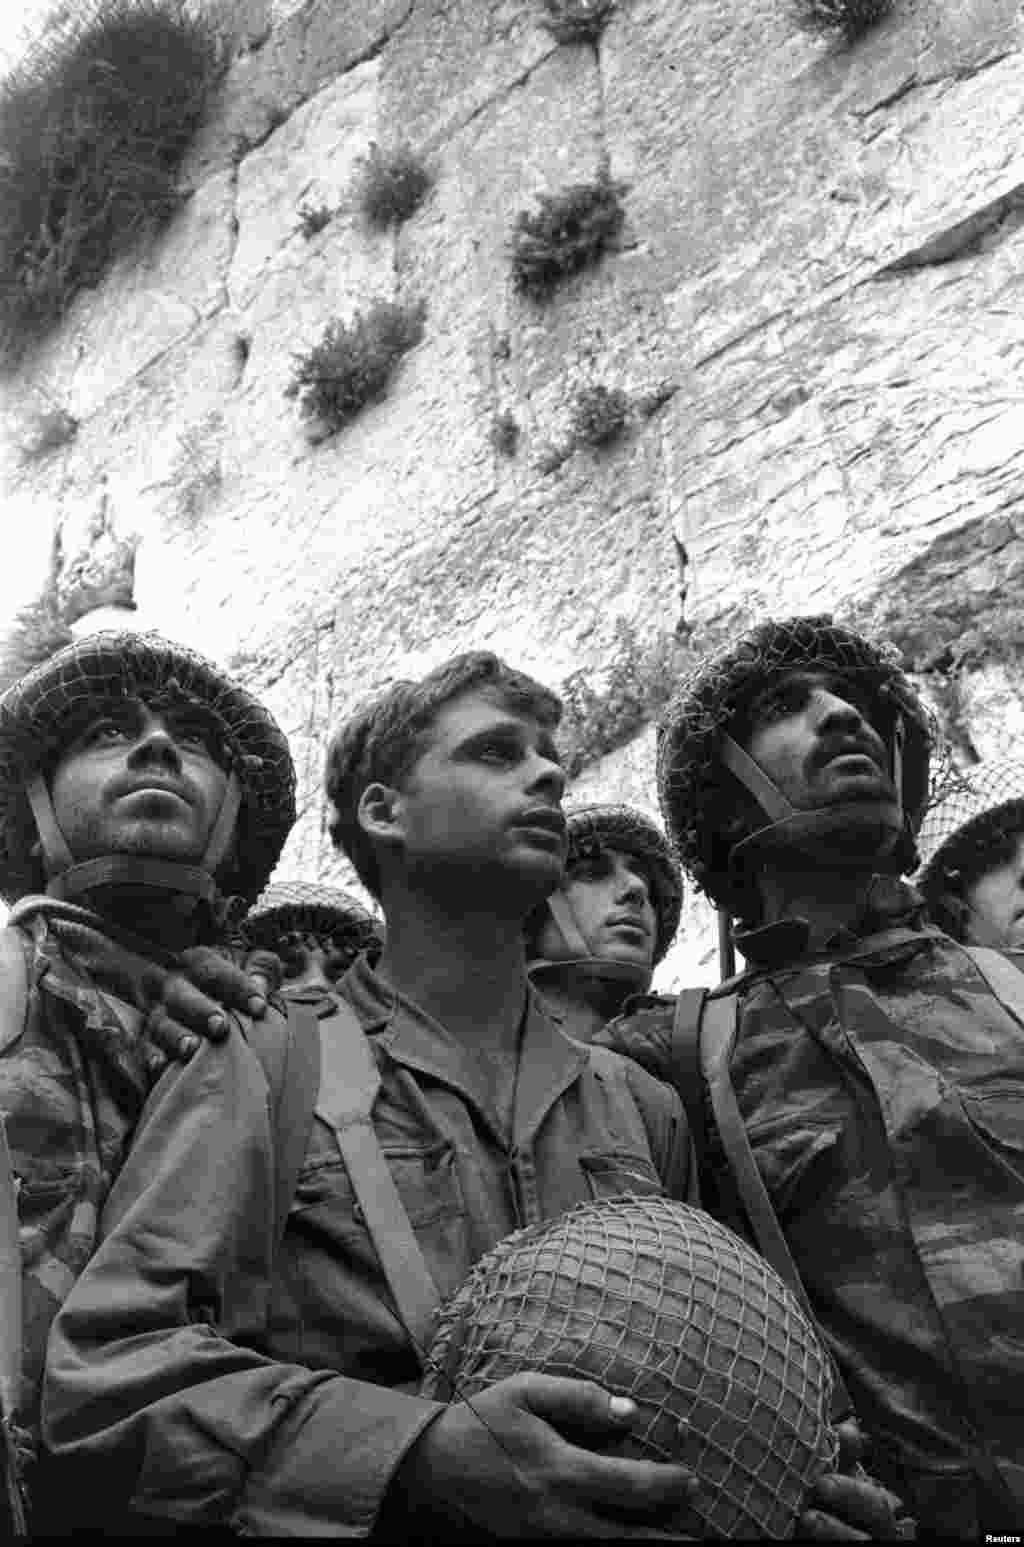 Isroillik askarlar Quddusning Eski shahar qismiga kirib borayapti / Israeli paratroopers stand in front of the Western wall in Jerusalem&#39;s Old City in June 1967 after it was captured during the Middle East War.